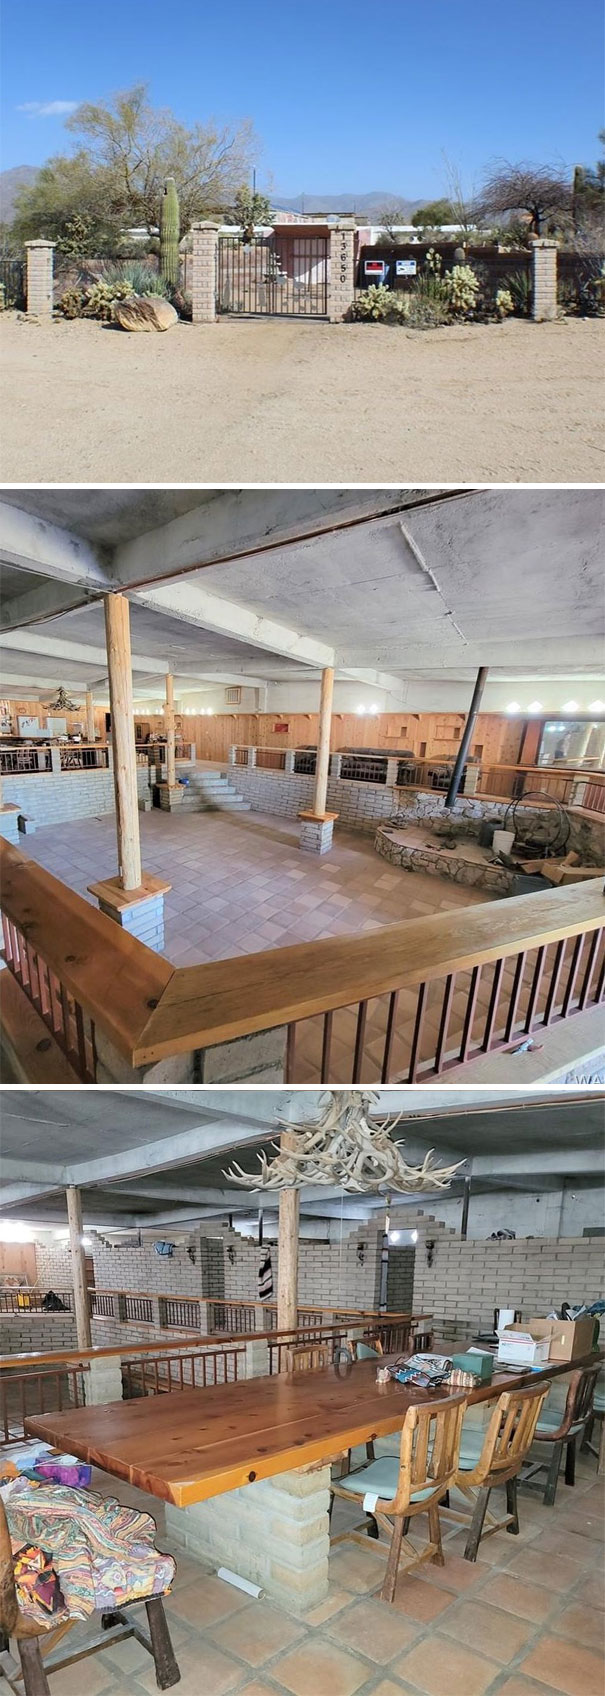 If You’ve Been Looking For An Over 7,000 Square Foot Bunker In Arizona For Under $400k Then Today Is Your Lucky Day